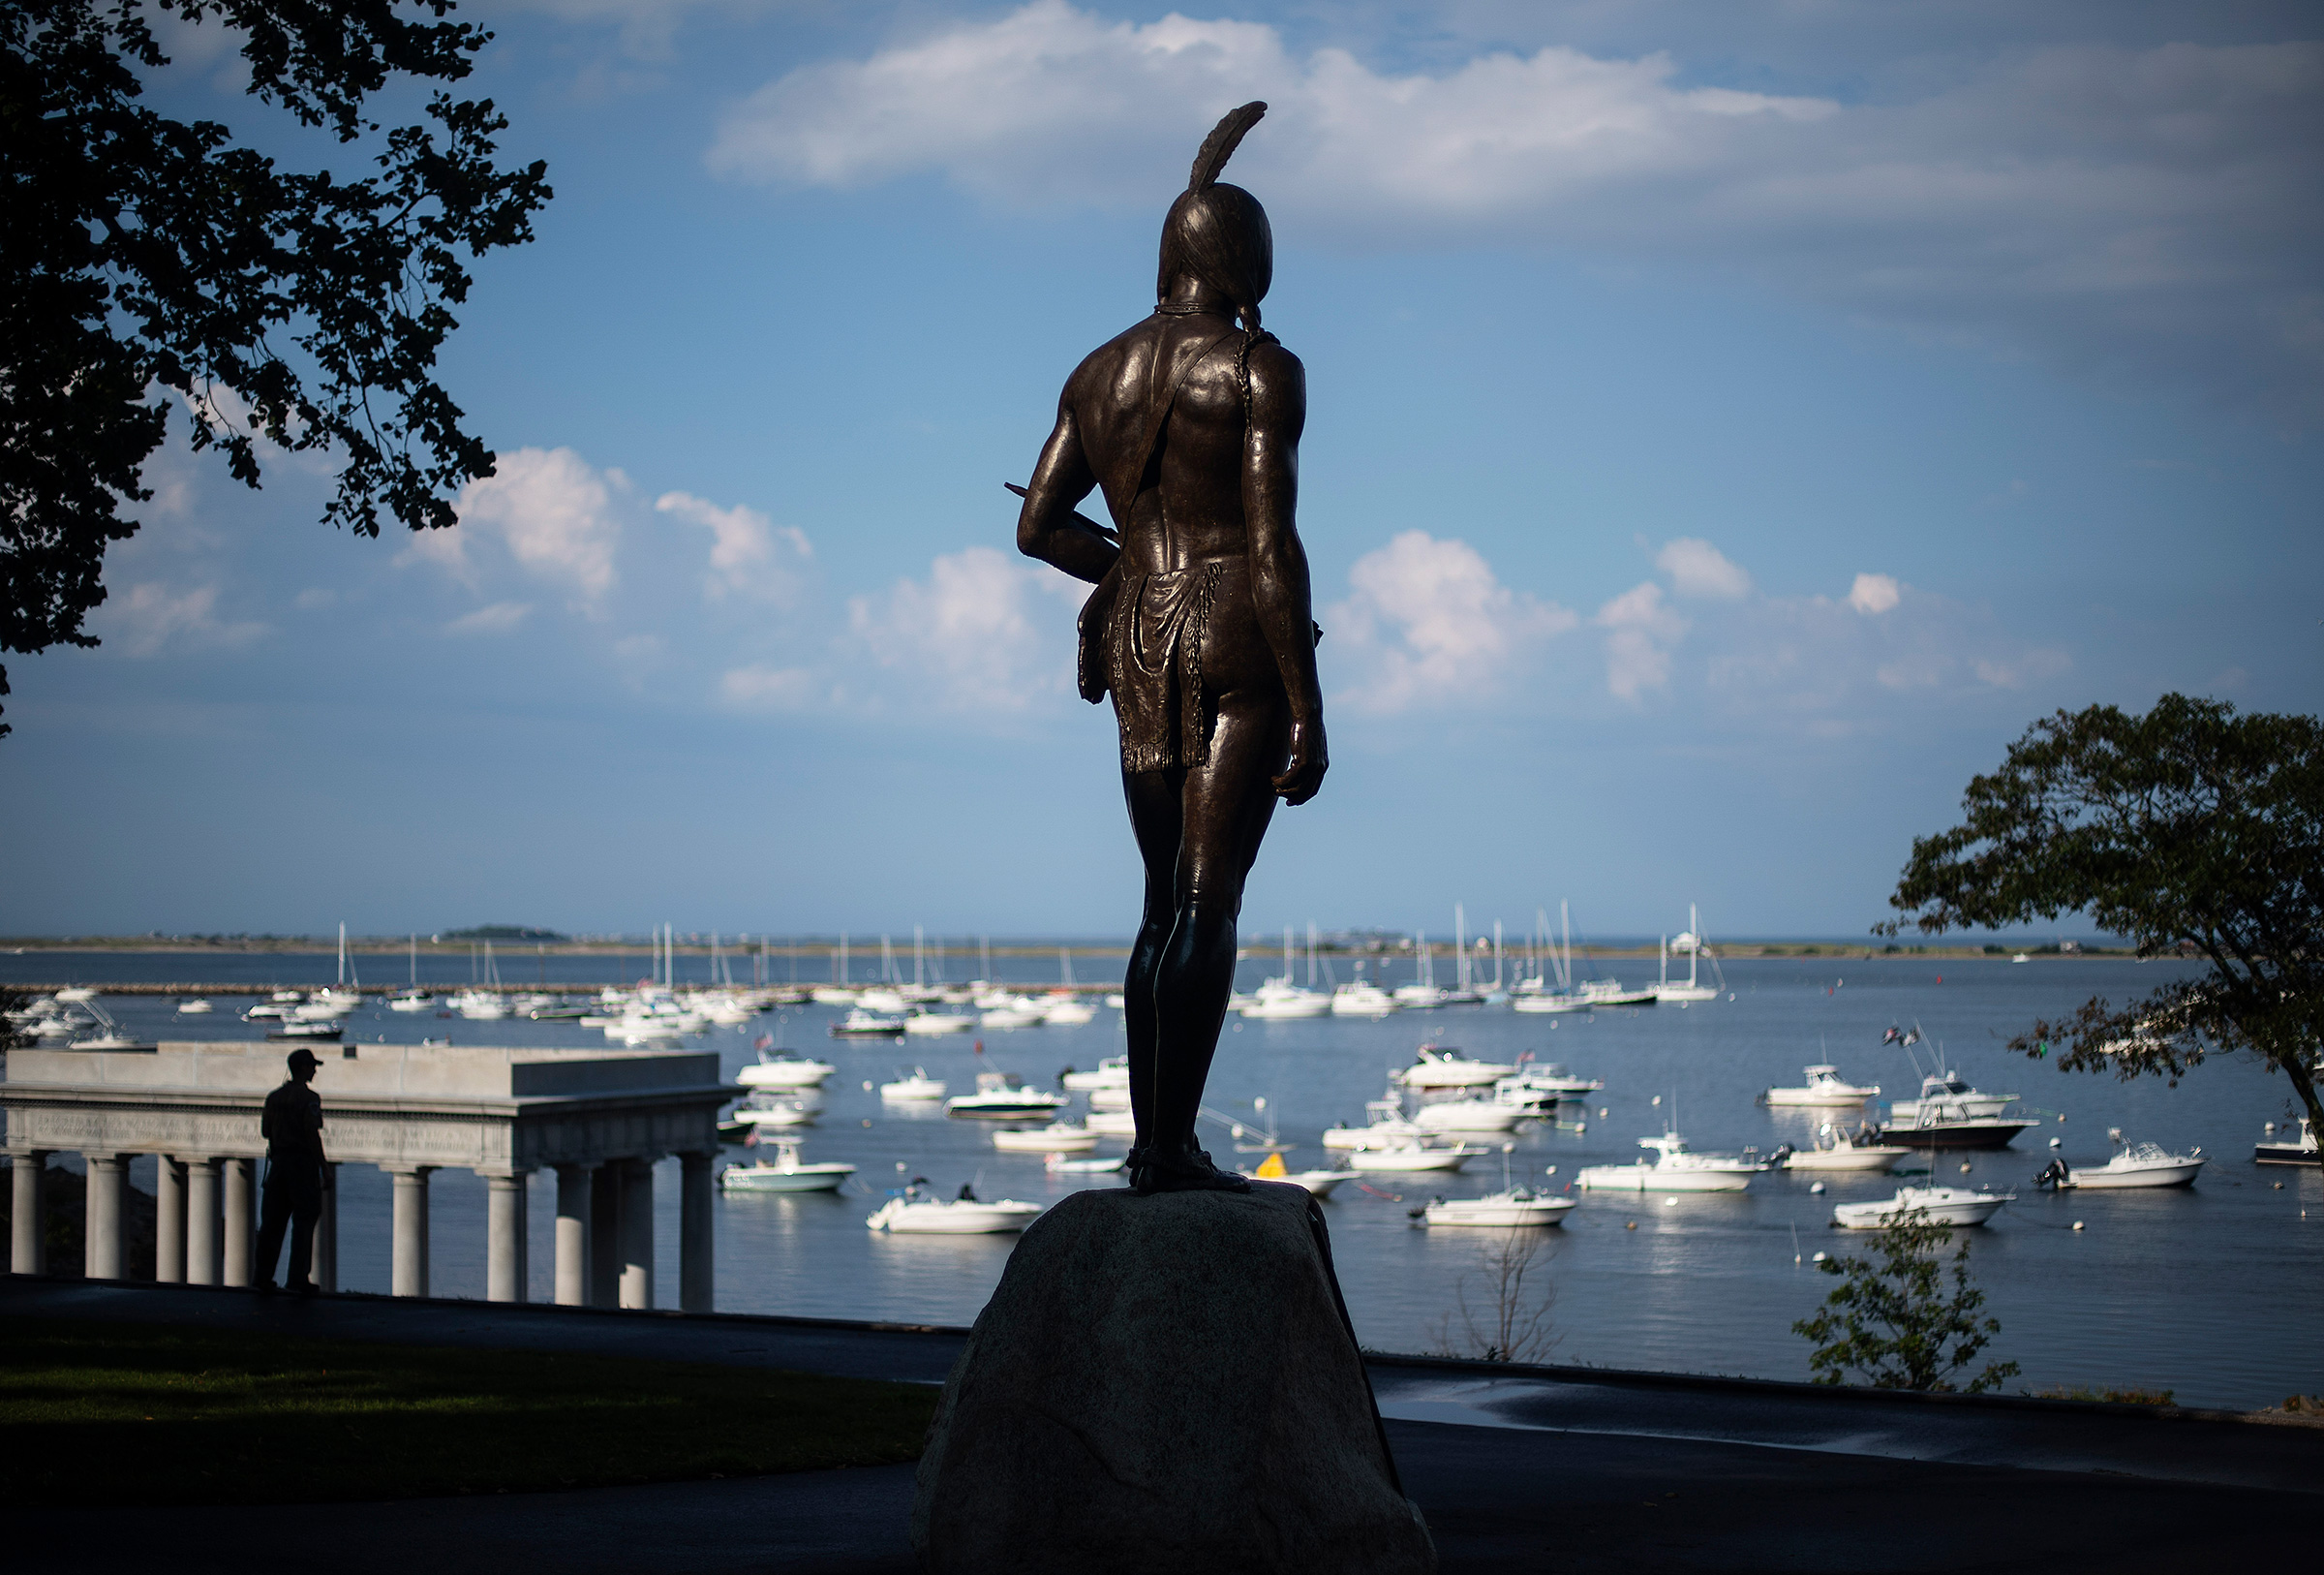 A statue of the Native Sachem (leader) Massasoit looks out over the traditional point of arrival of the Pilgrims on the Mayflower in 1620, in Plymouth, Mass., Aug. 12, 2020.